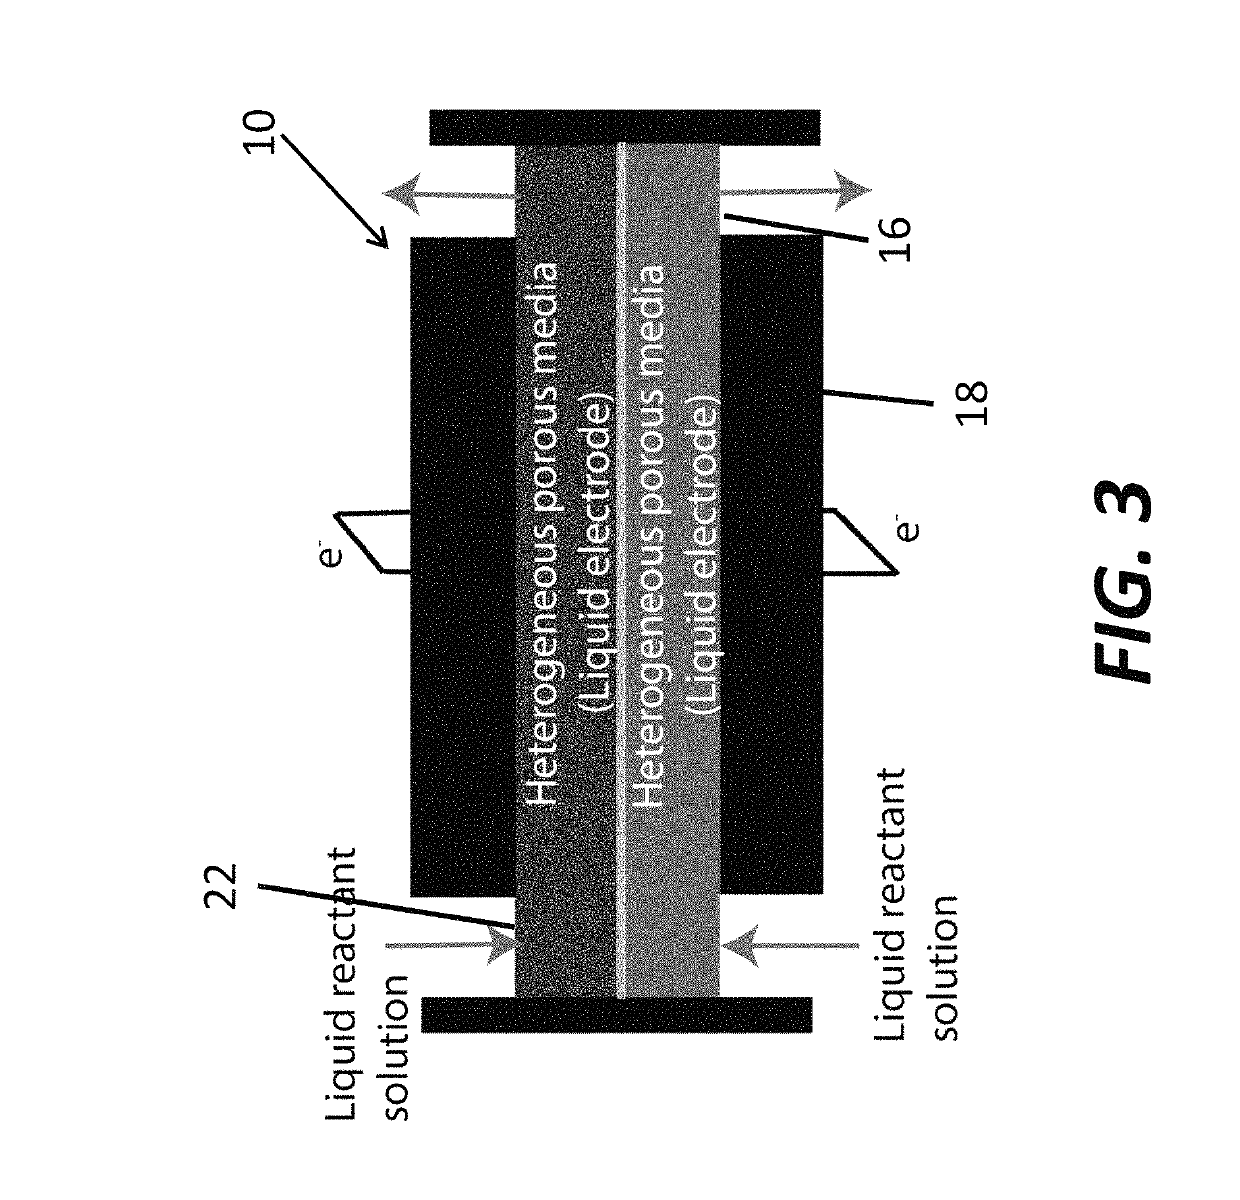 Flow battery with dispersion blocker between electrolyte channel and electrode